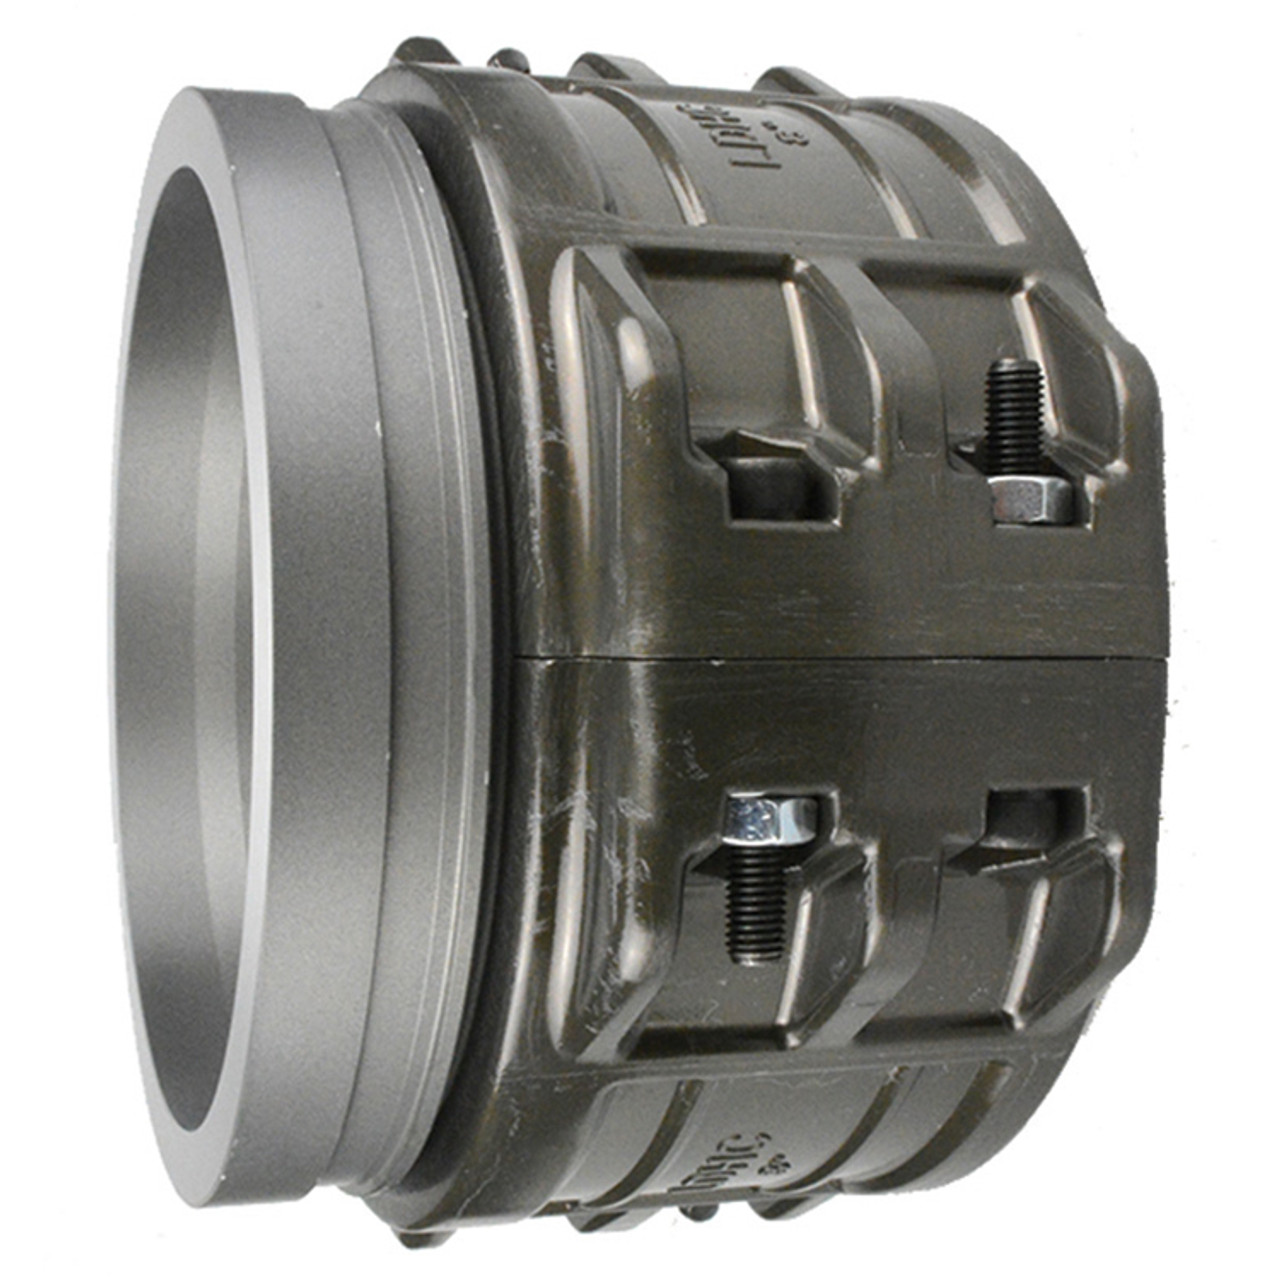 8" Grooved Coupling w/ Reusable Clamp  G38VR-800